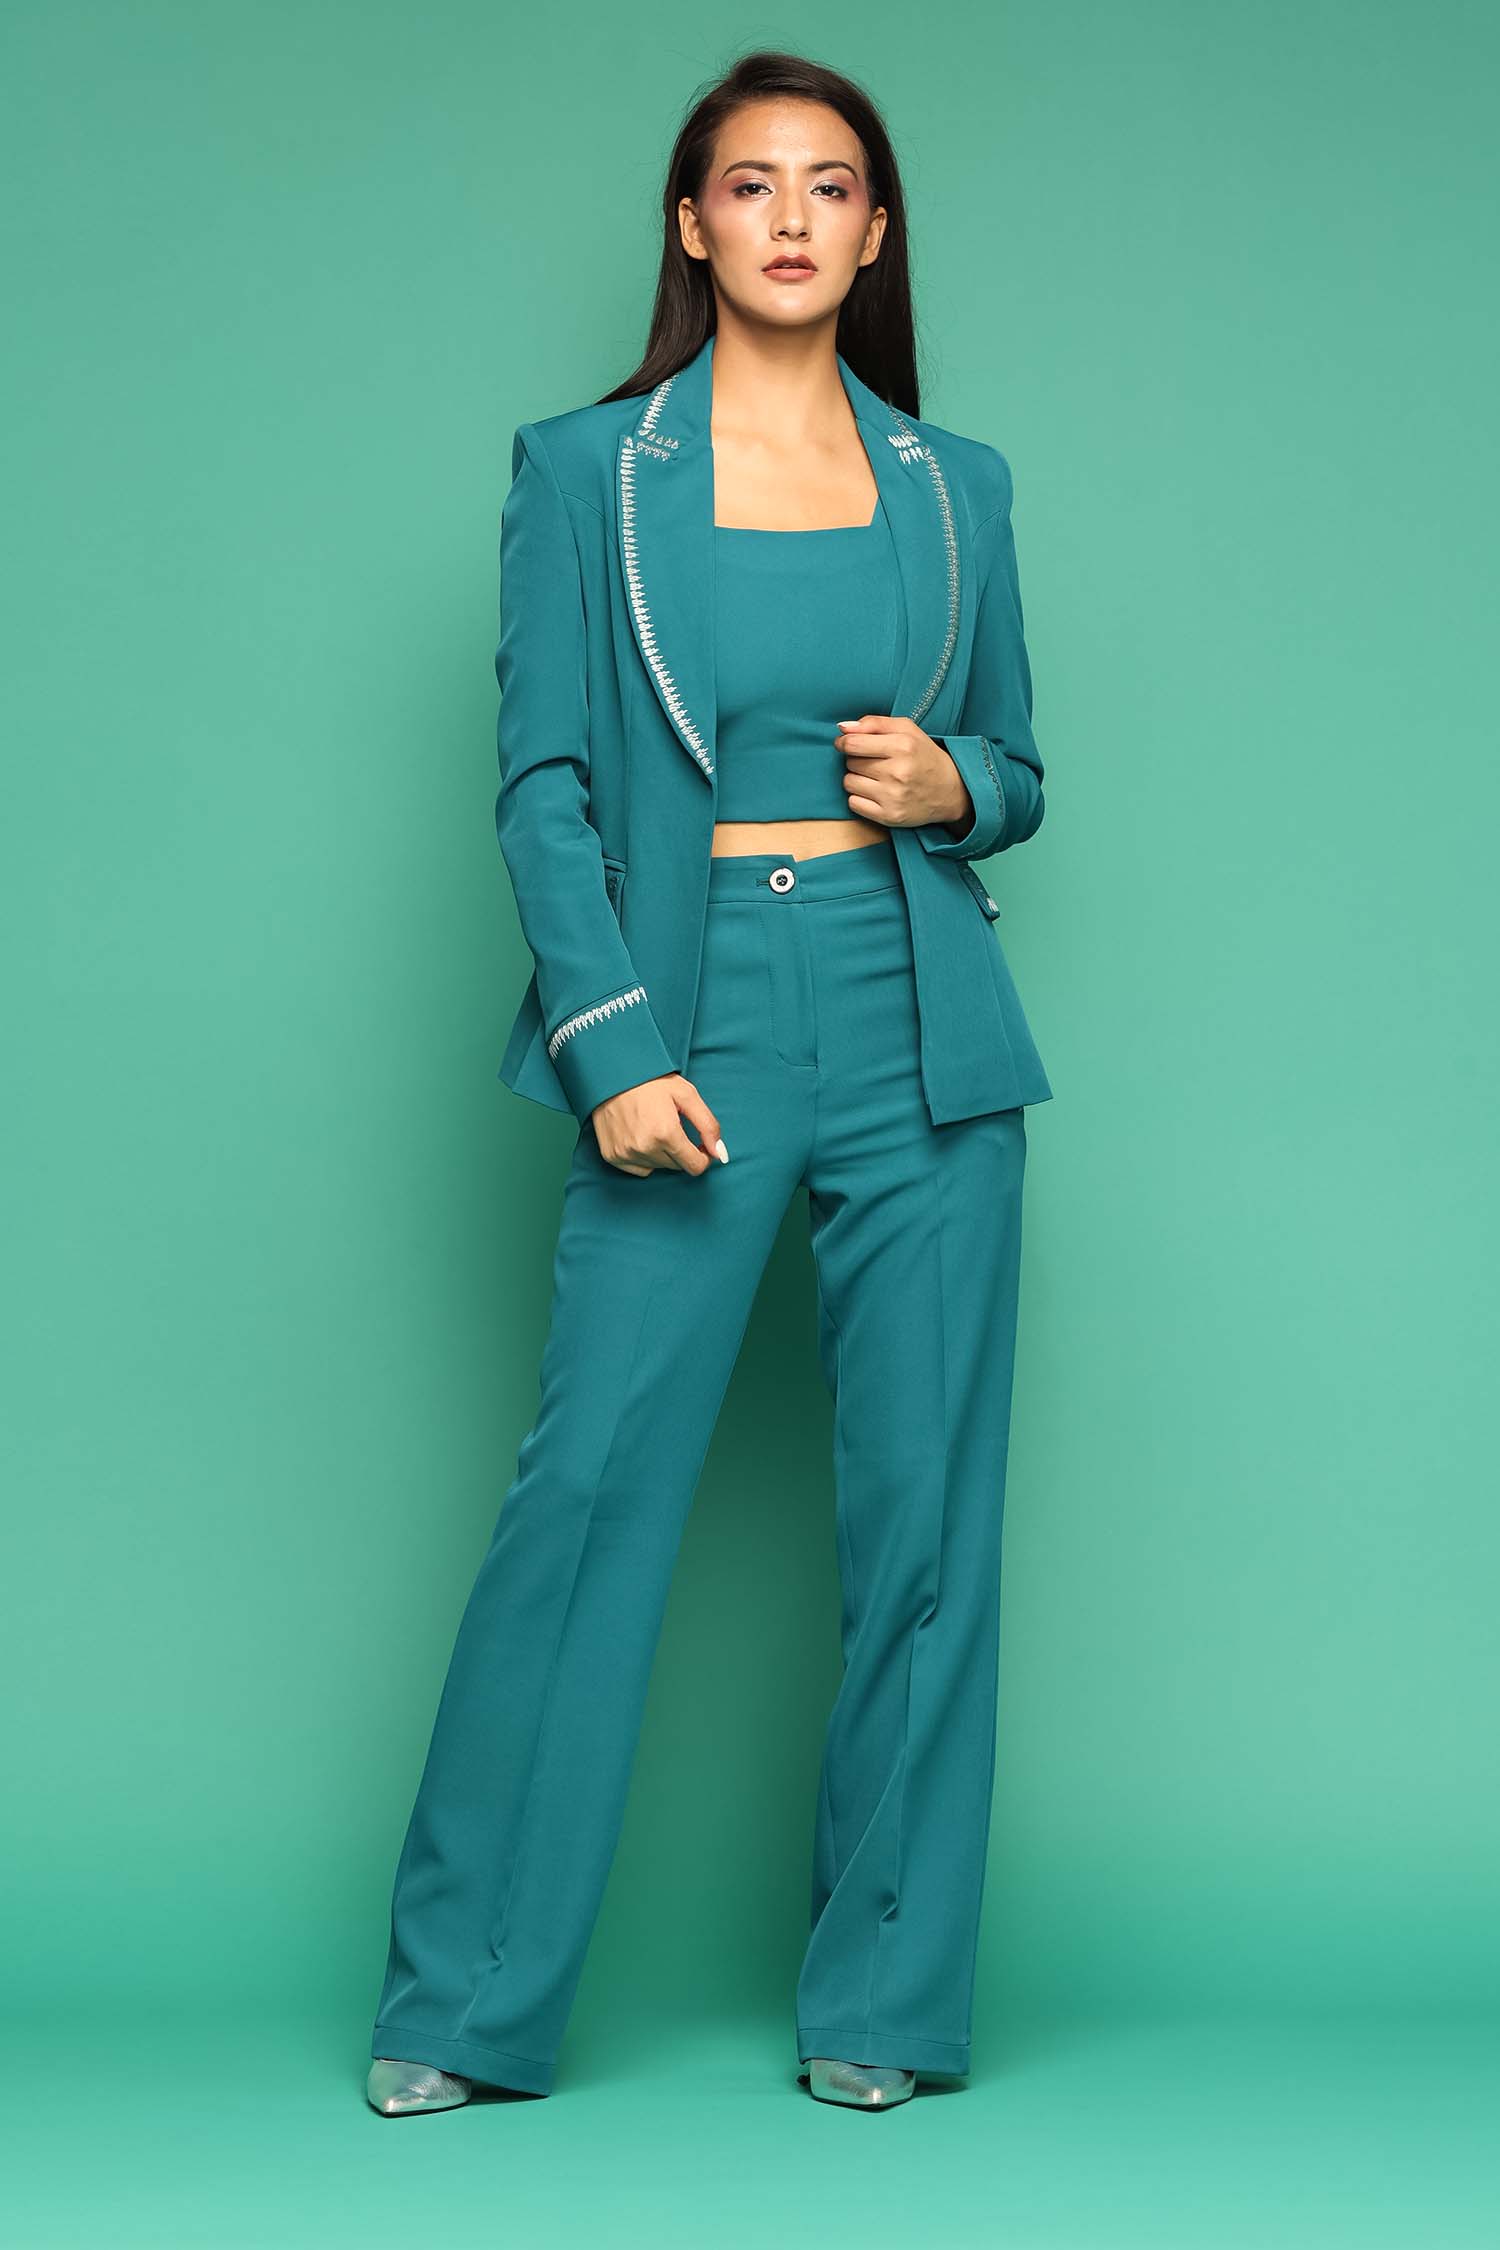 Petal Embroidered Teal Blue Blazer with Crop Top and Flared Pants